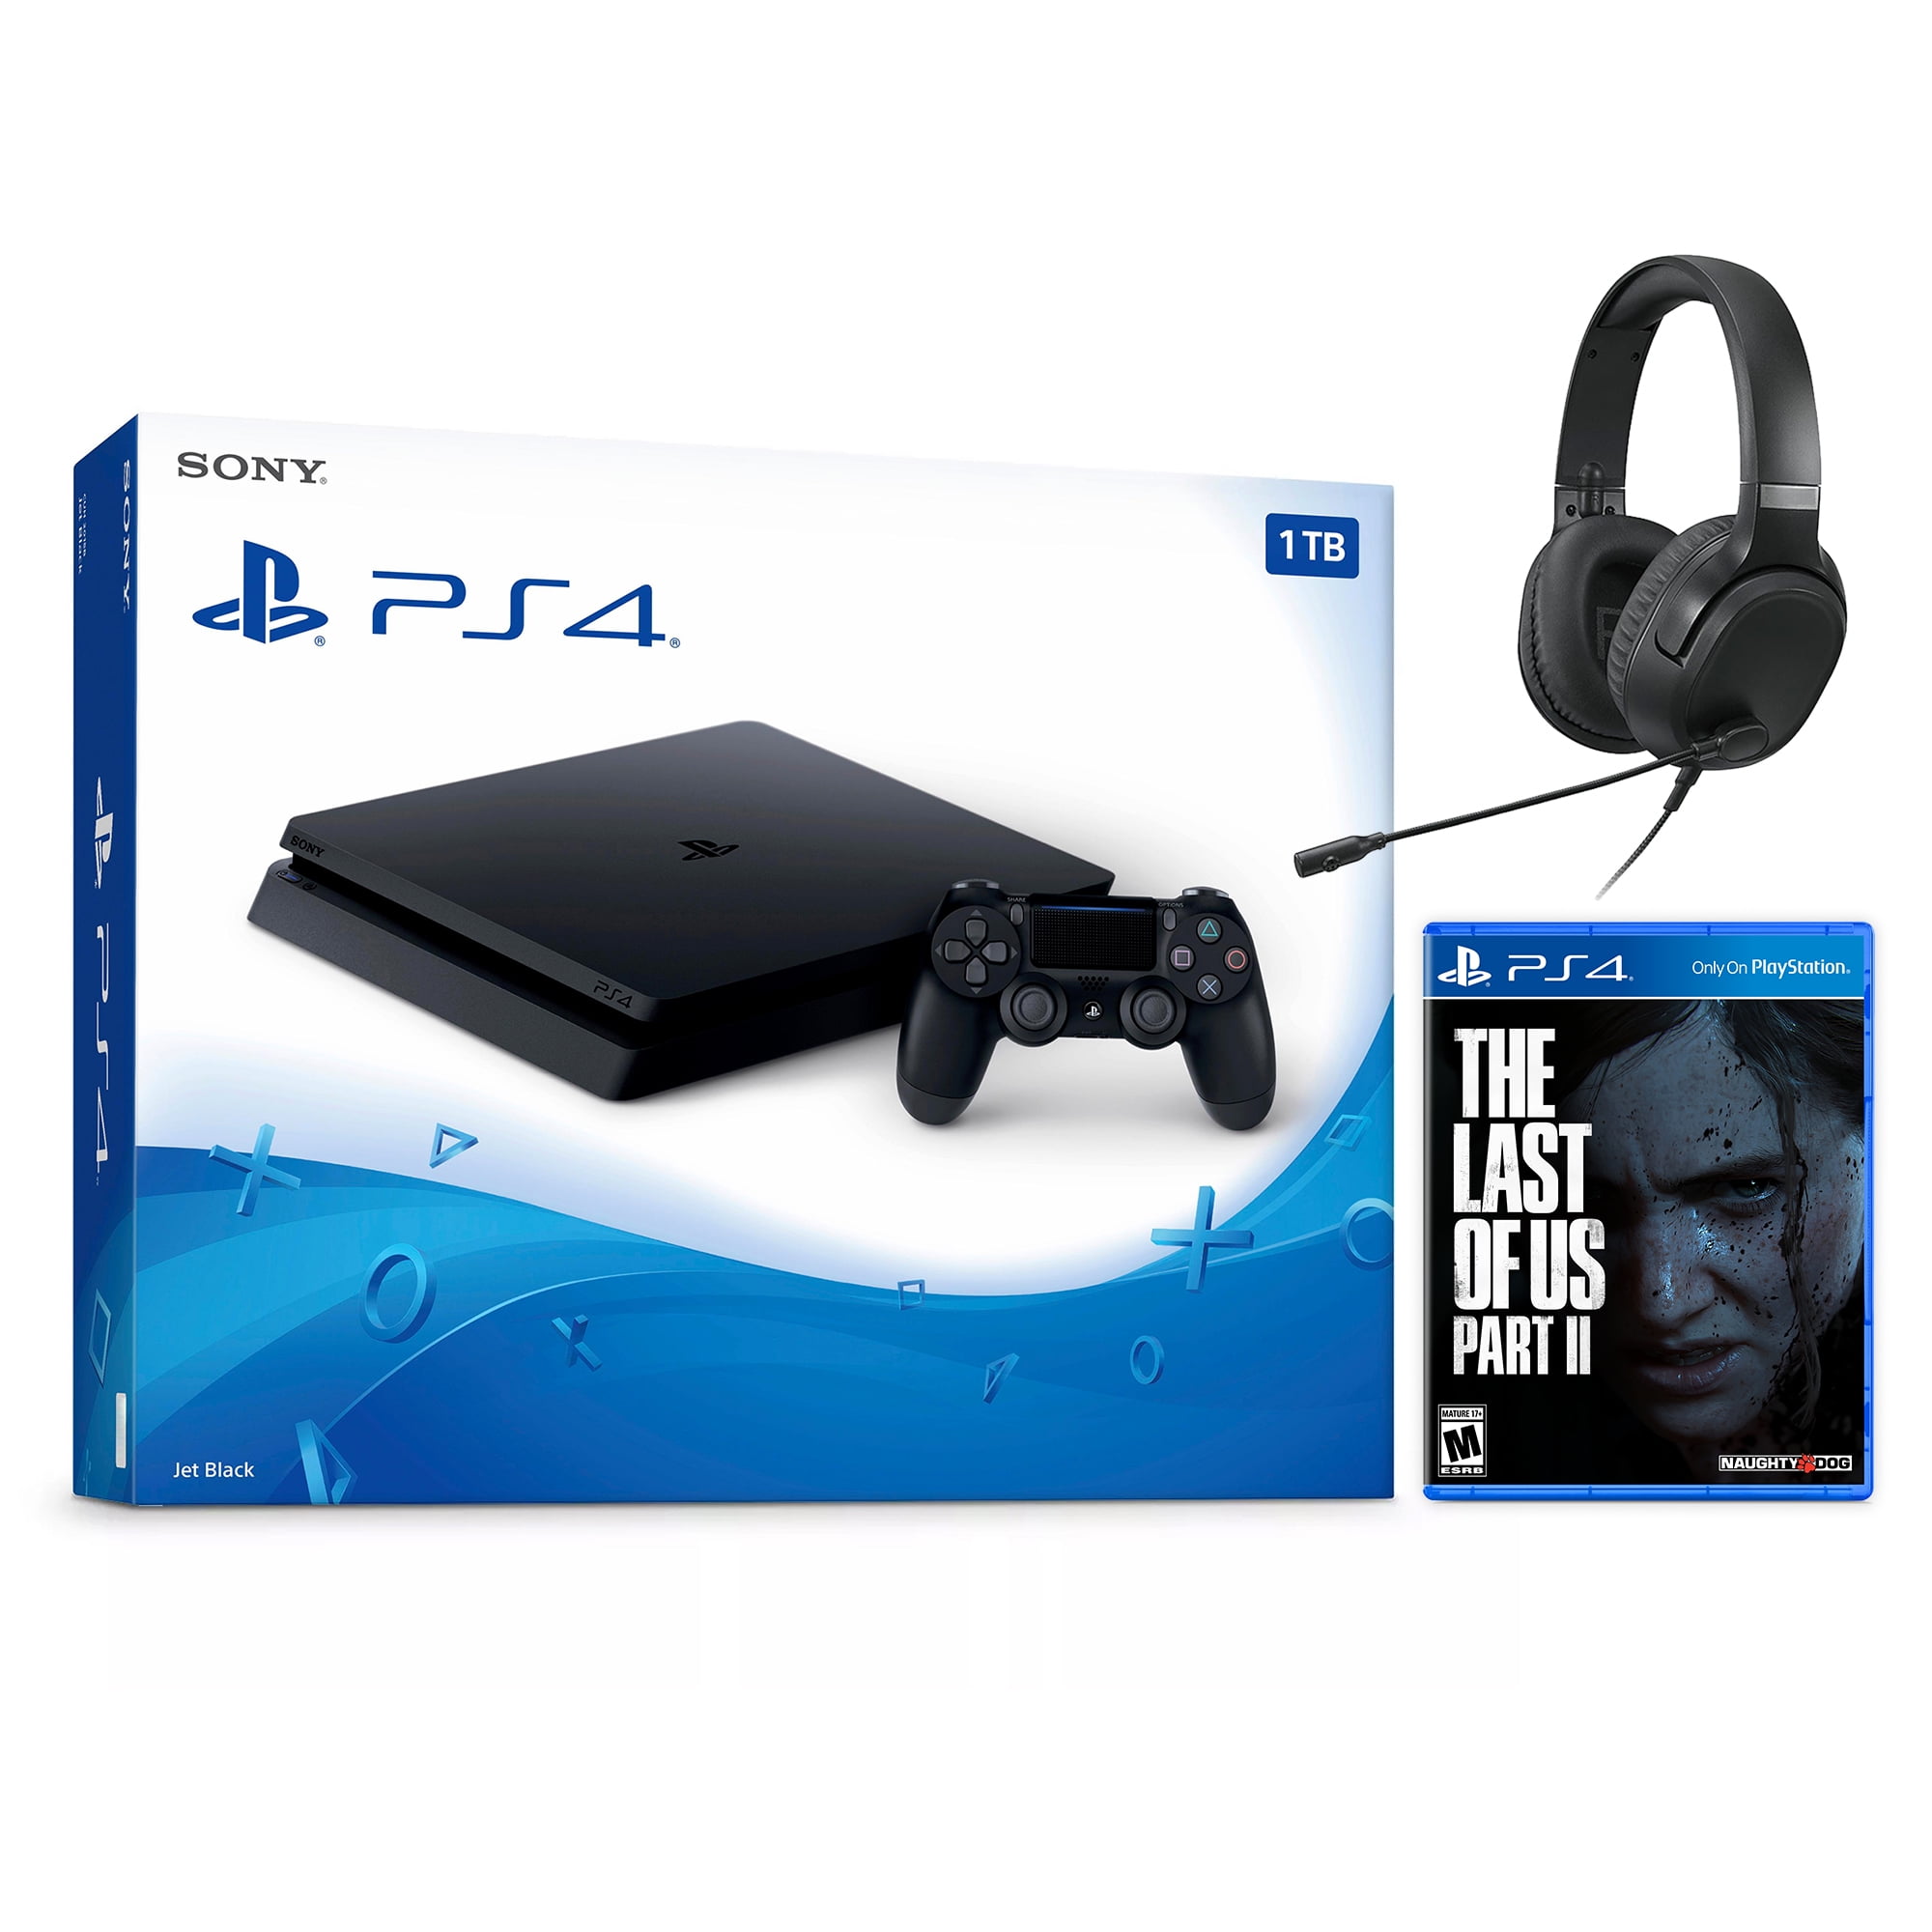 Acheter The Last of Us Part II Standard Edition - Playstation 4 prix promo  neuf et occasion pas cher